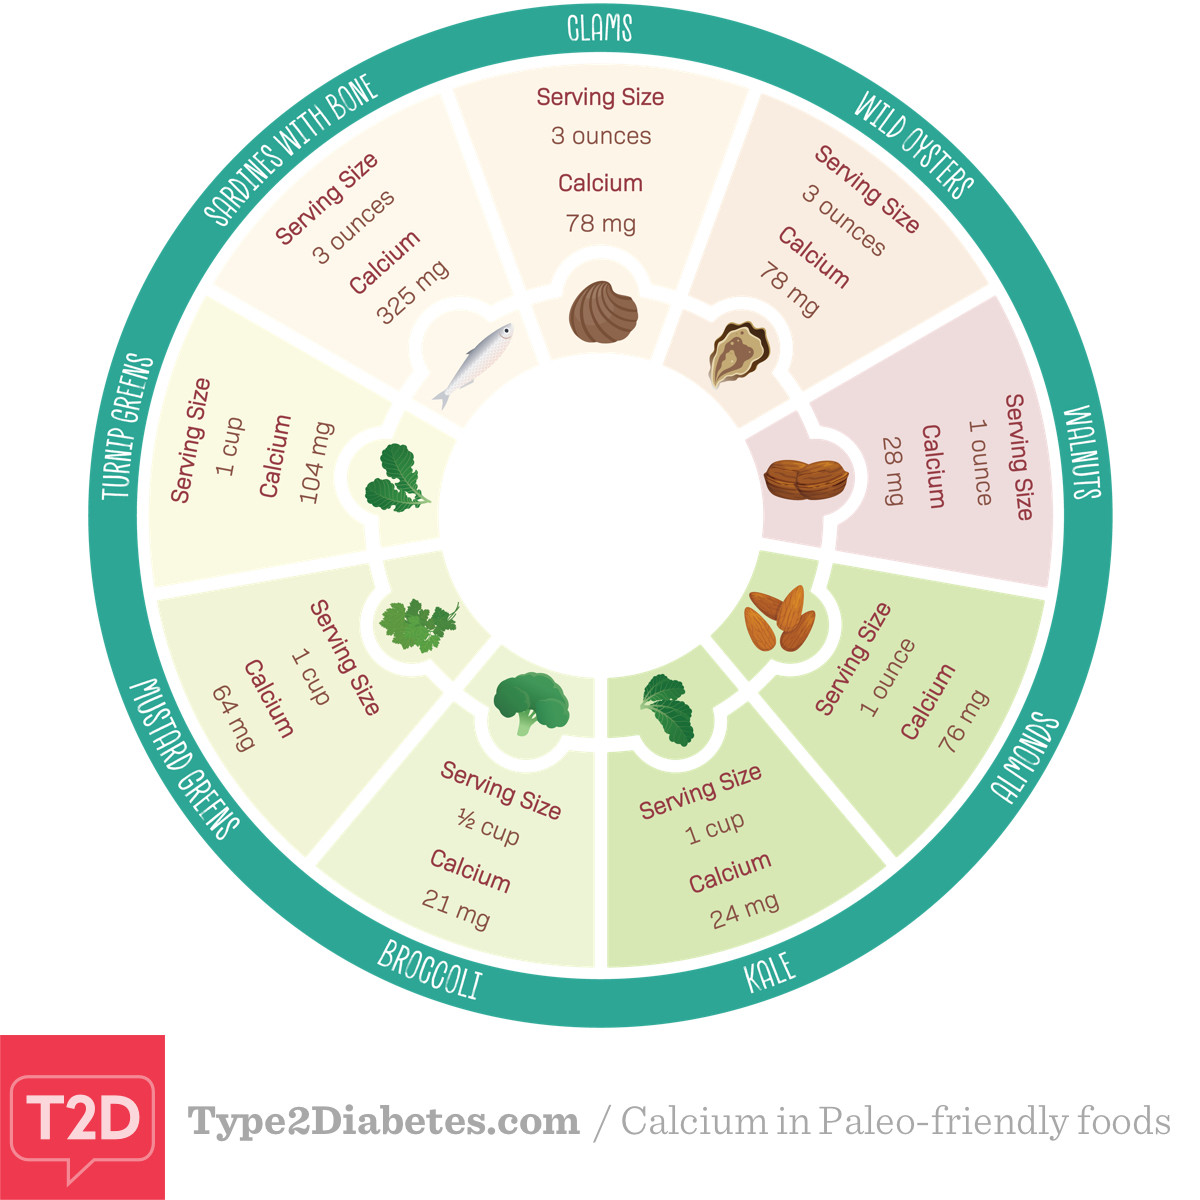 Paleo Diet And Type 1 Diabetes
 Before You Start the Paleo Diet Read This